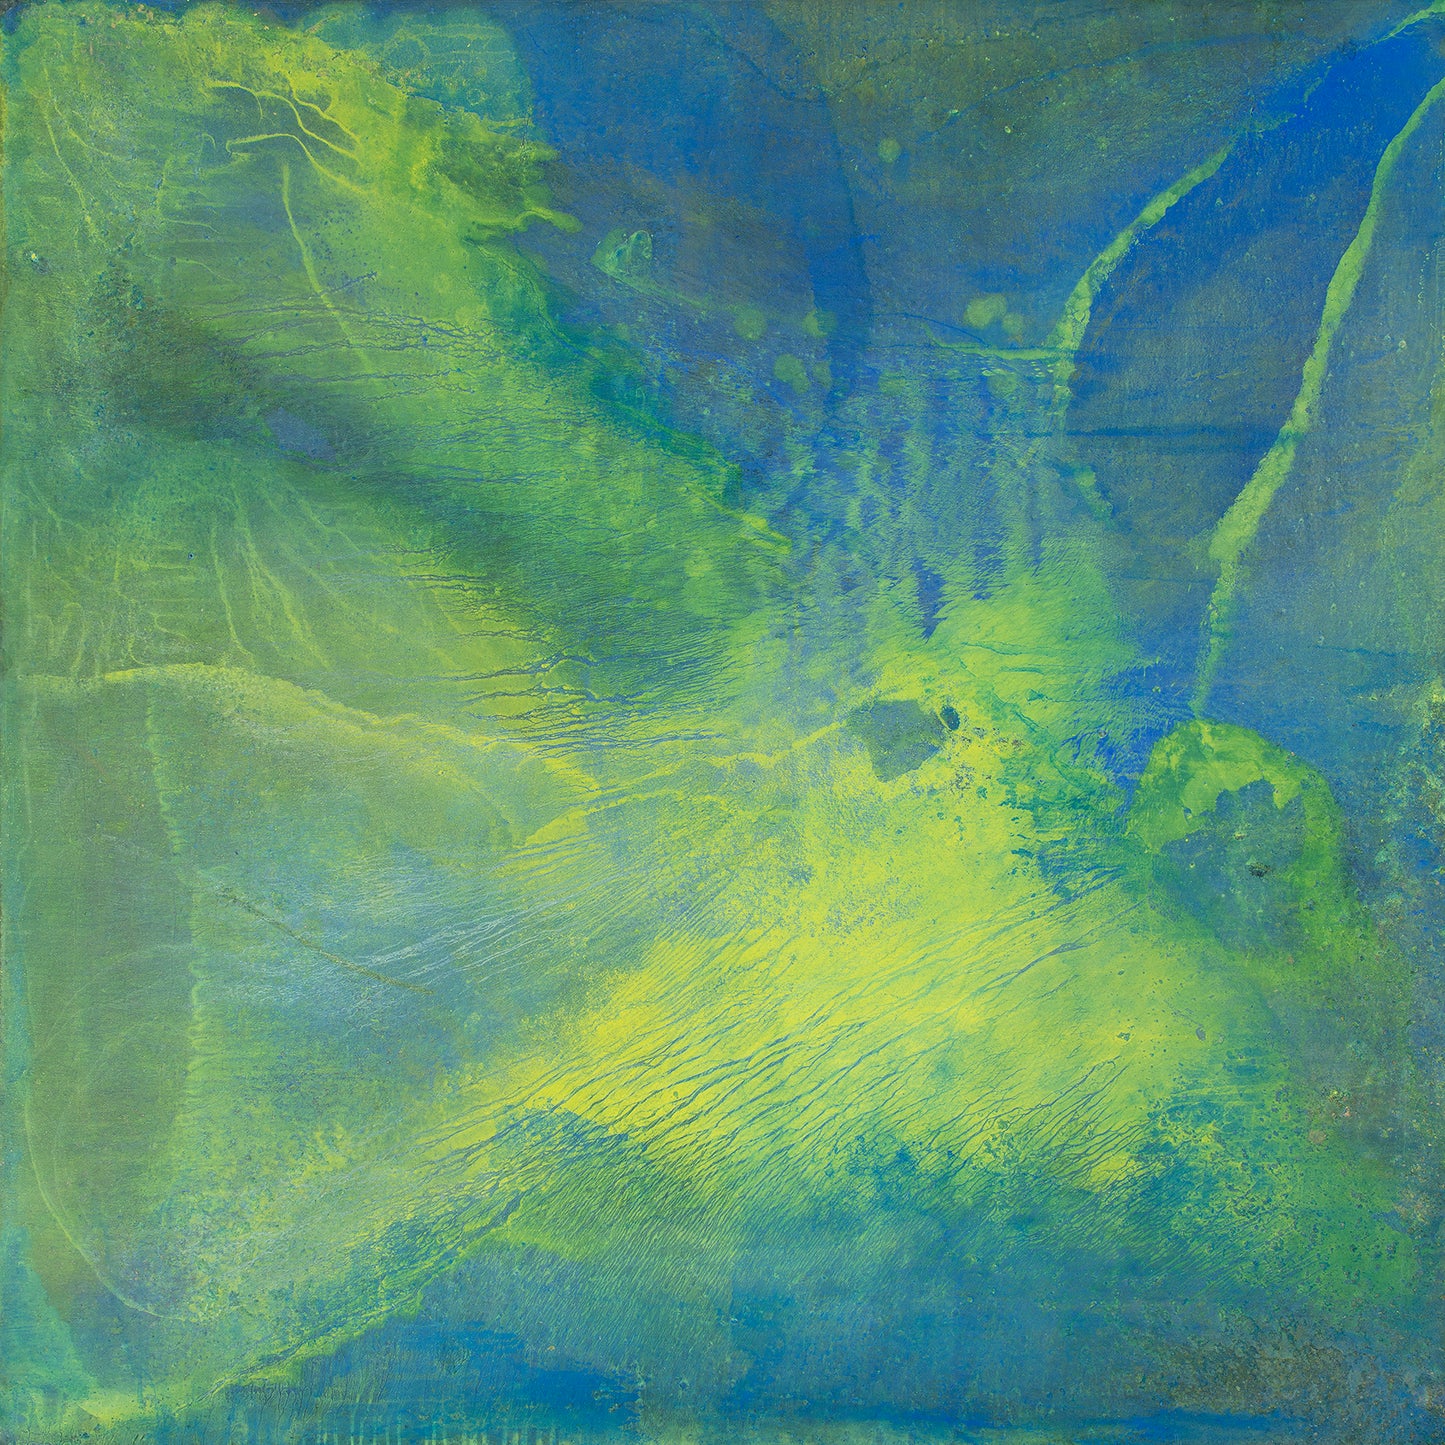 Green Machine, an oil on canvas original by Seth B Minkin, featuring abstractions in blues, greens and gold